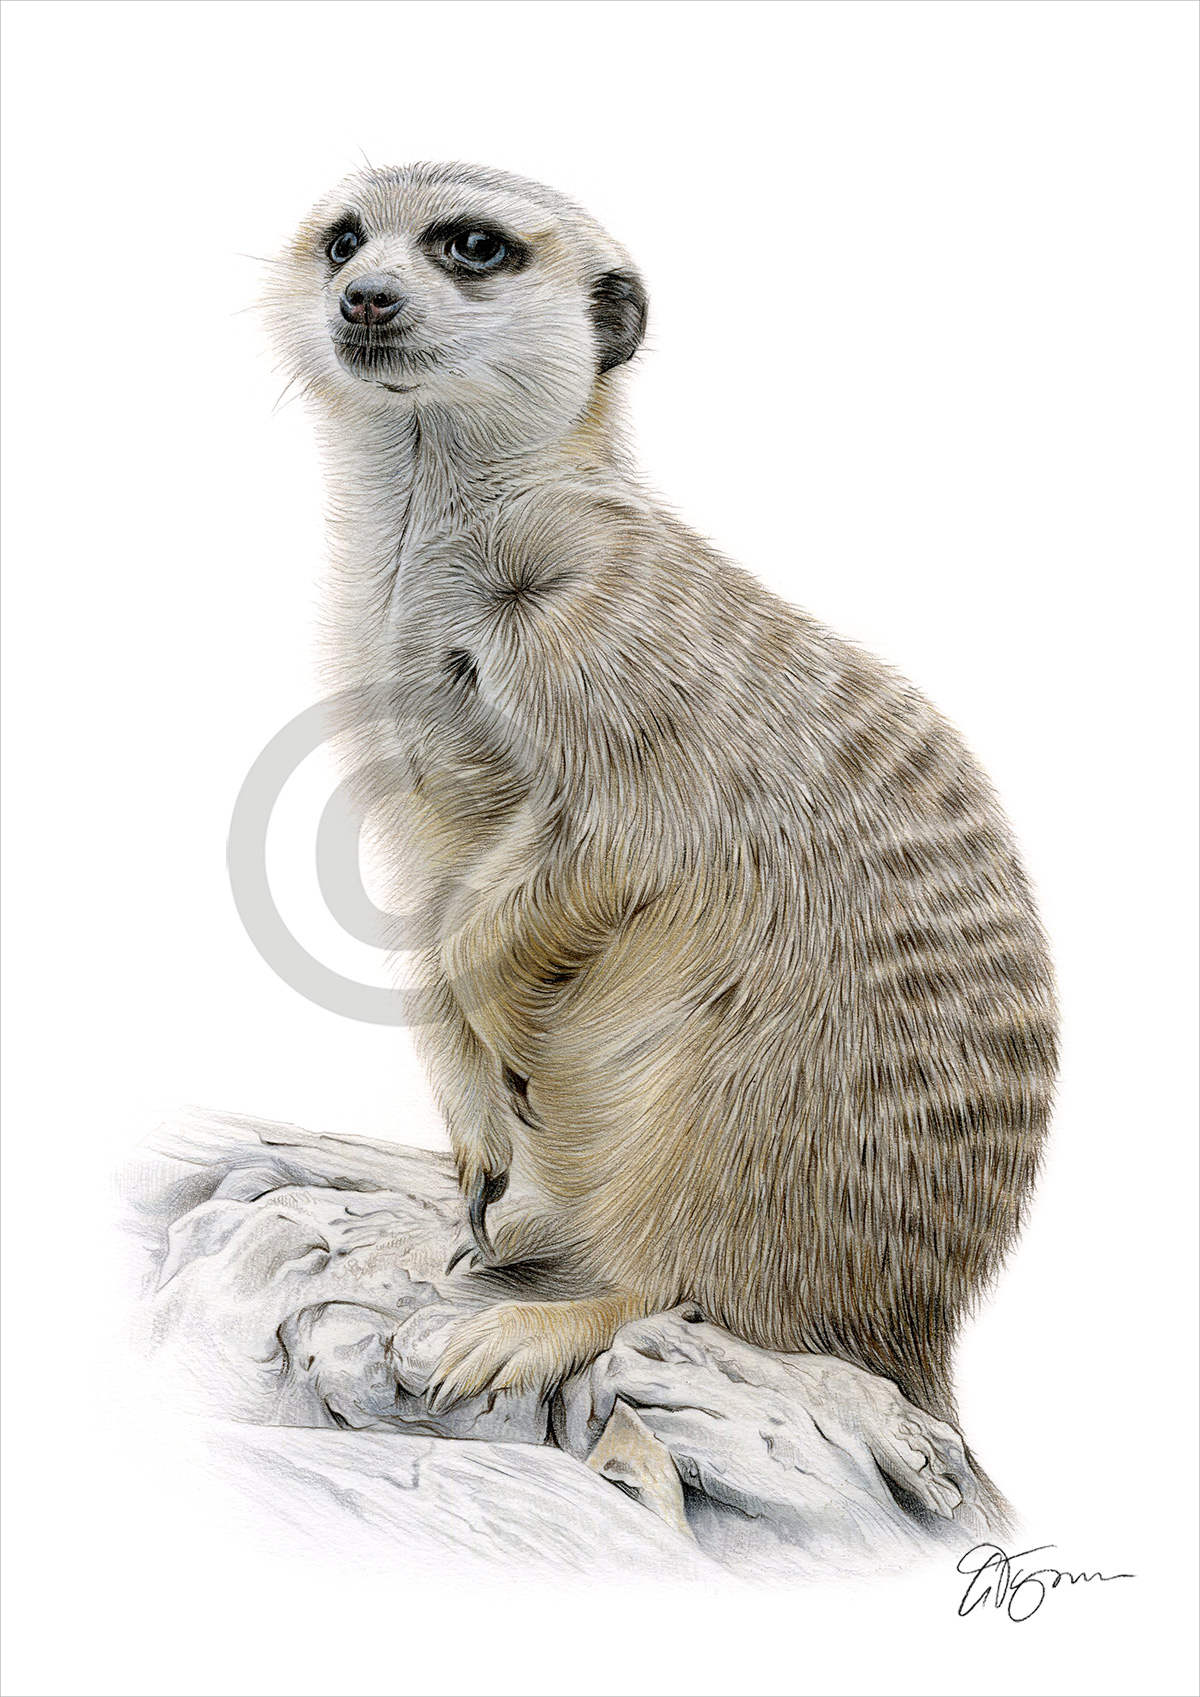 Colour pencil drawing of a meerkat sitting on a rock by artist Gary Tymon